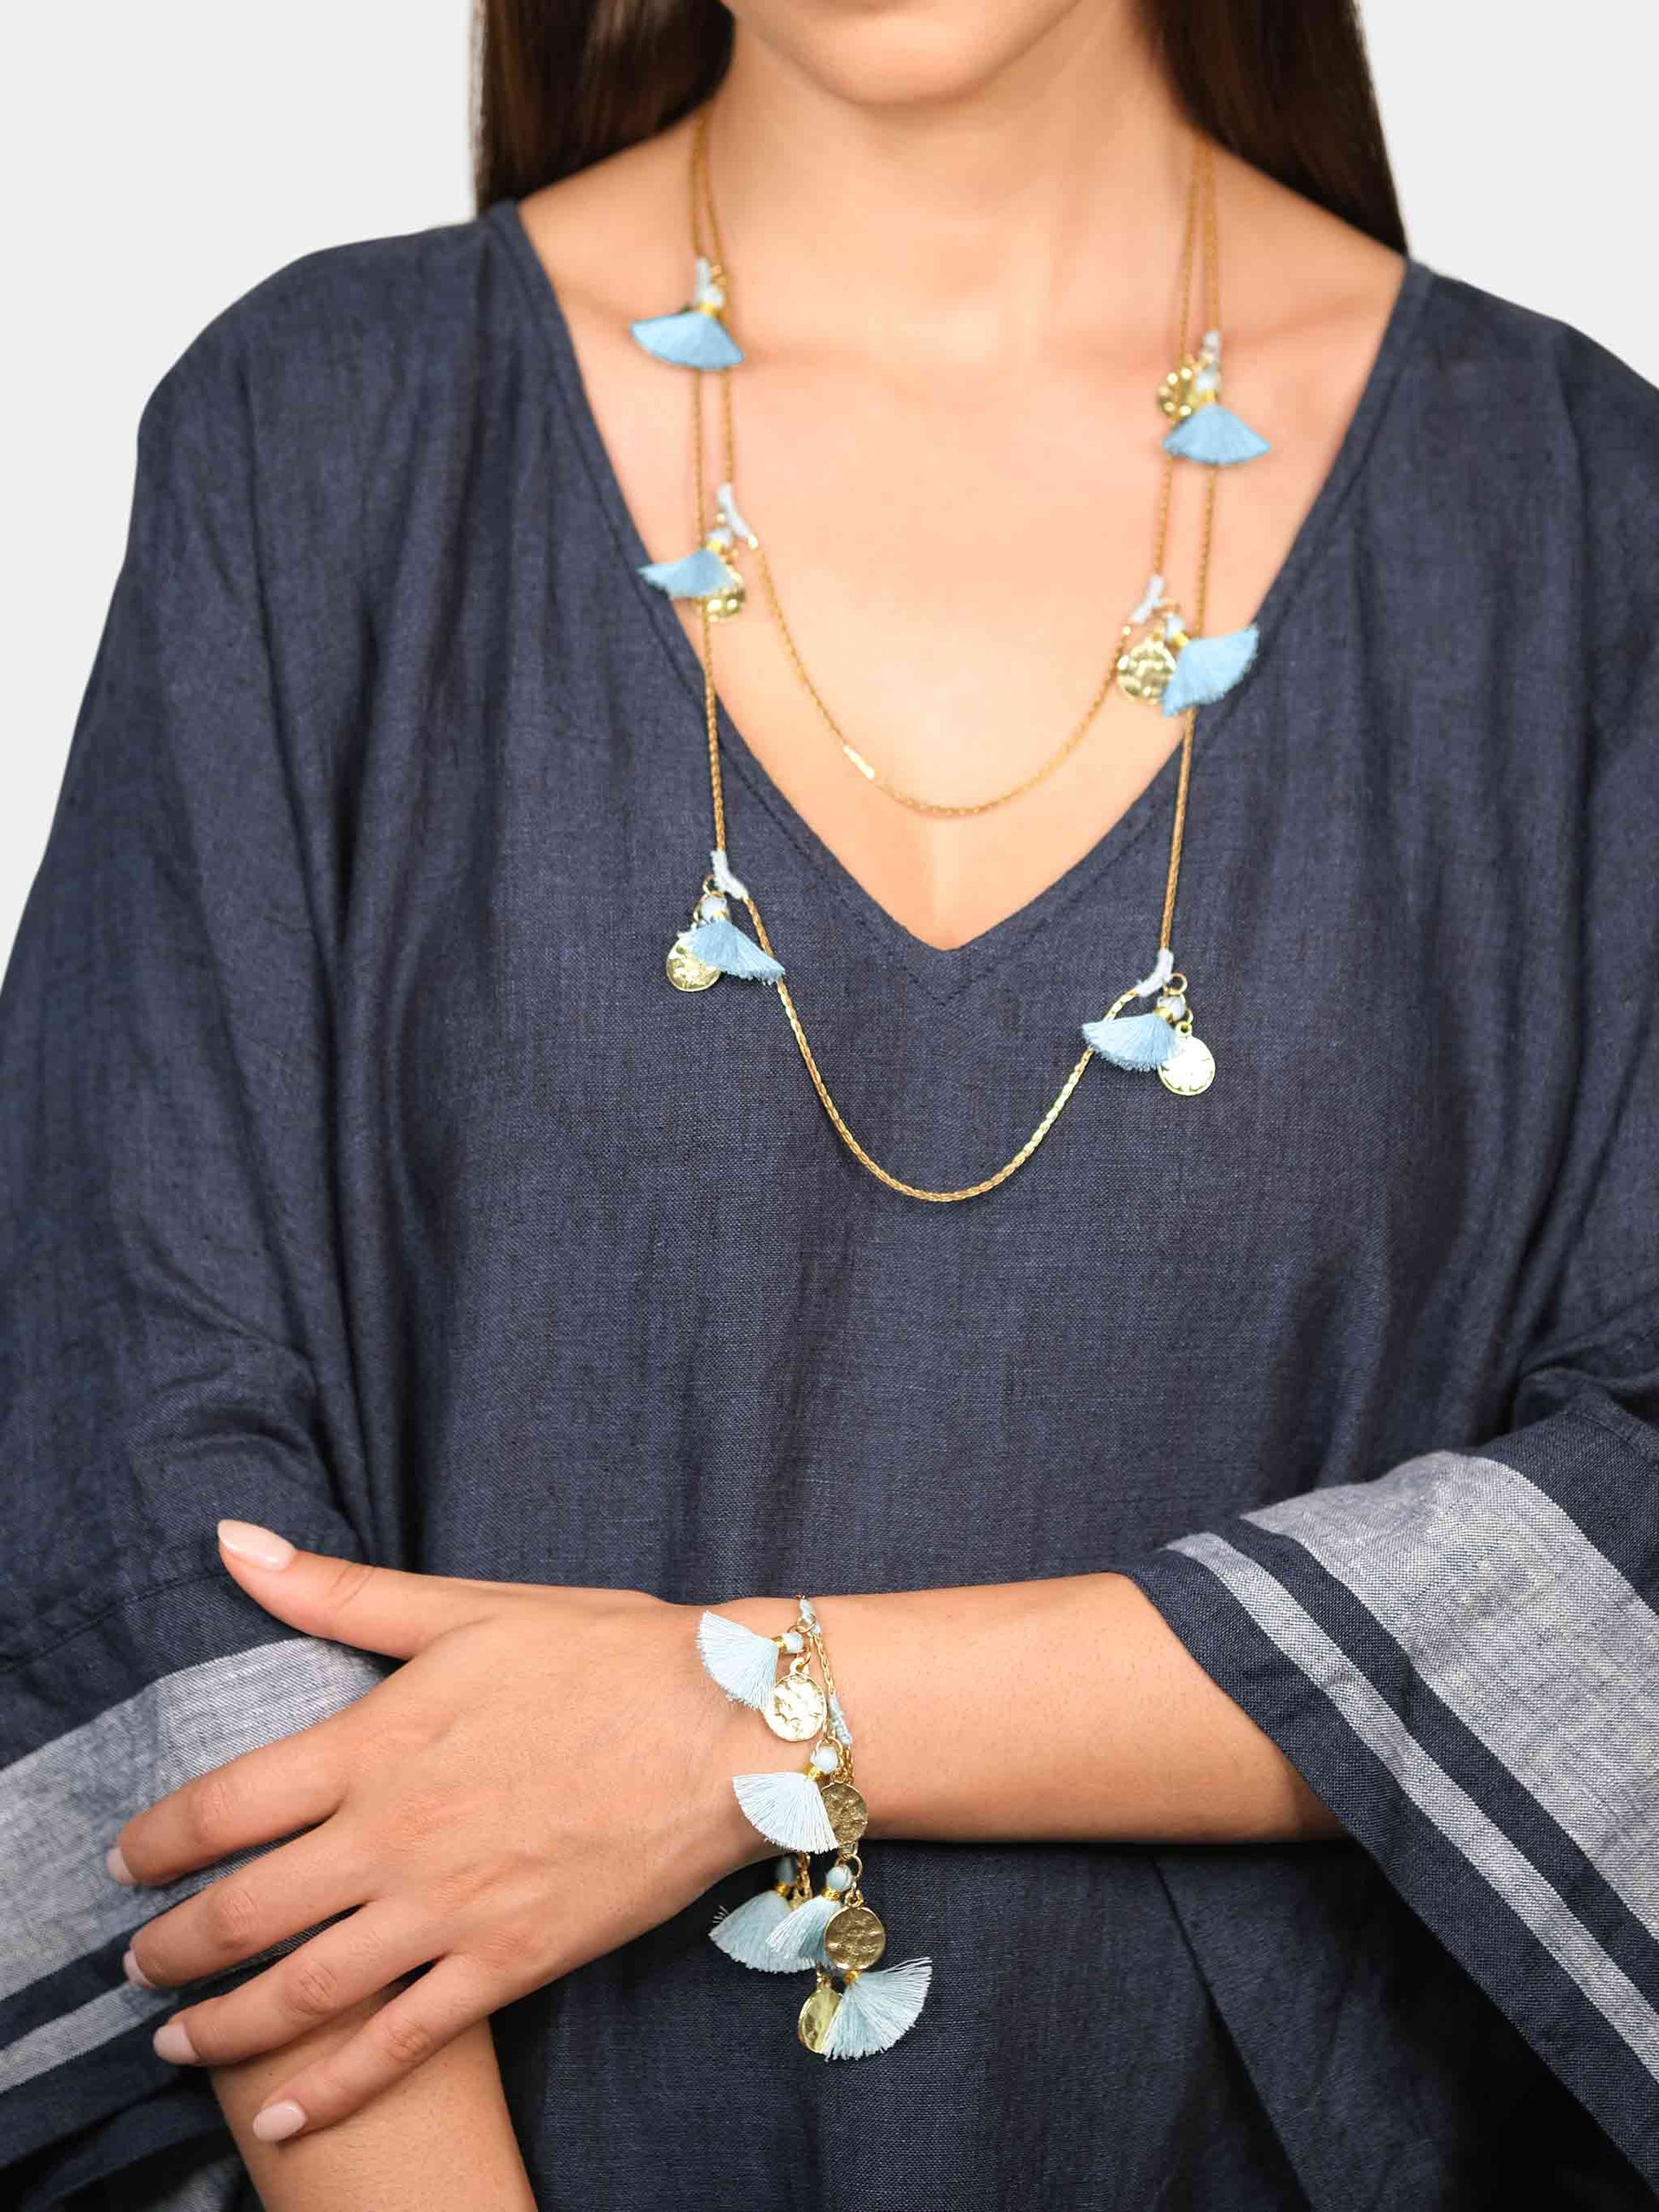 Forever Fringe Long Gold Necklace with Candy Blue Tassels